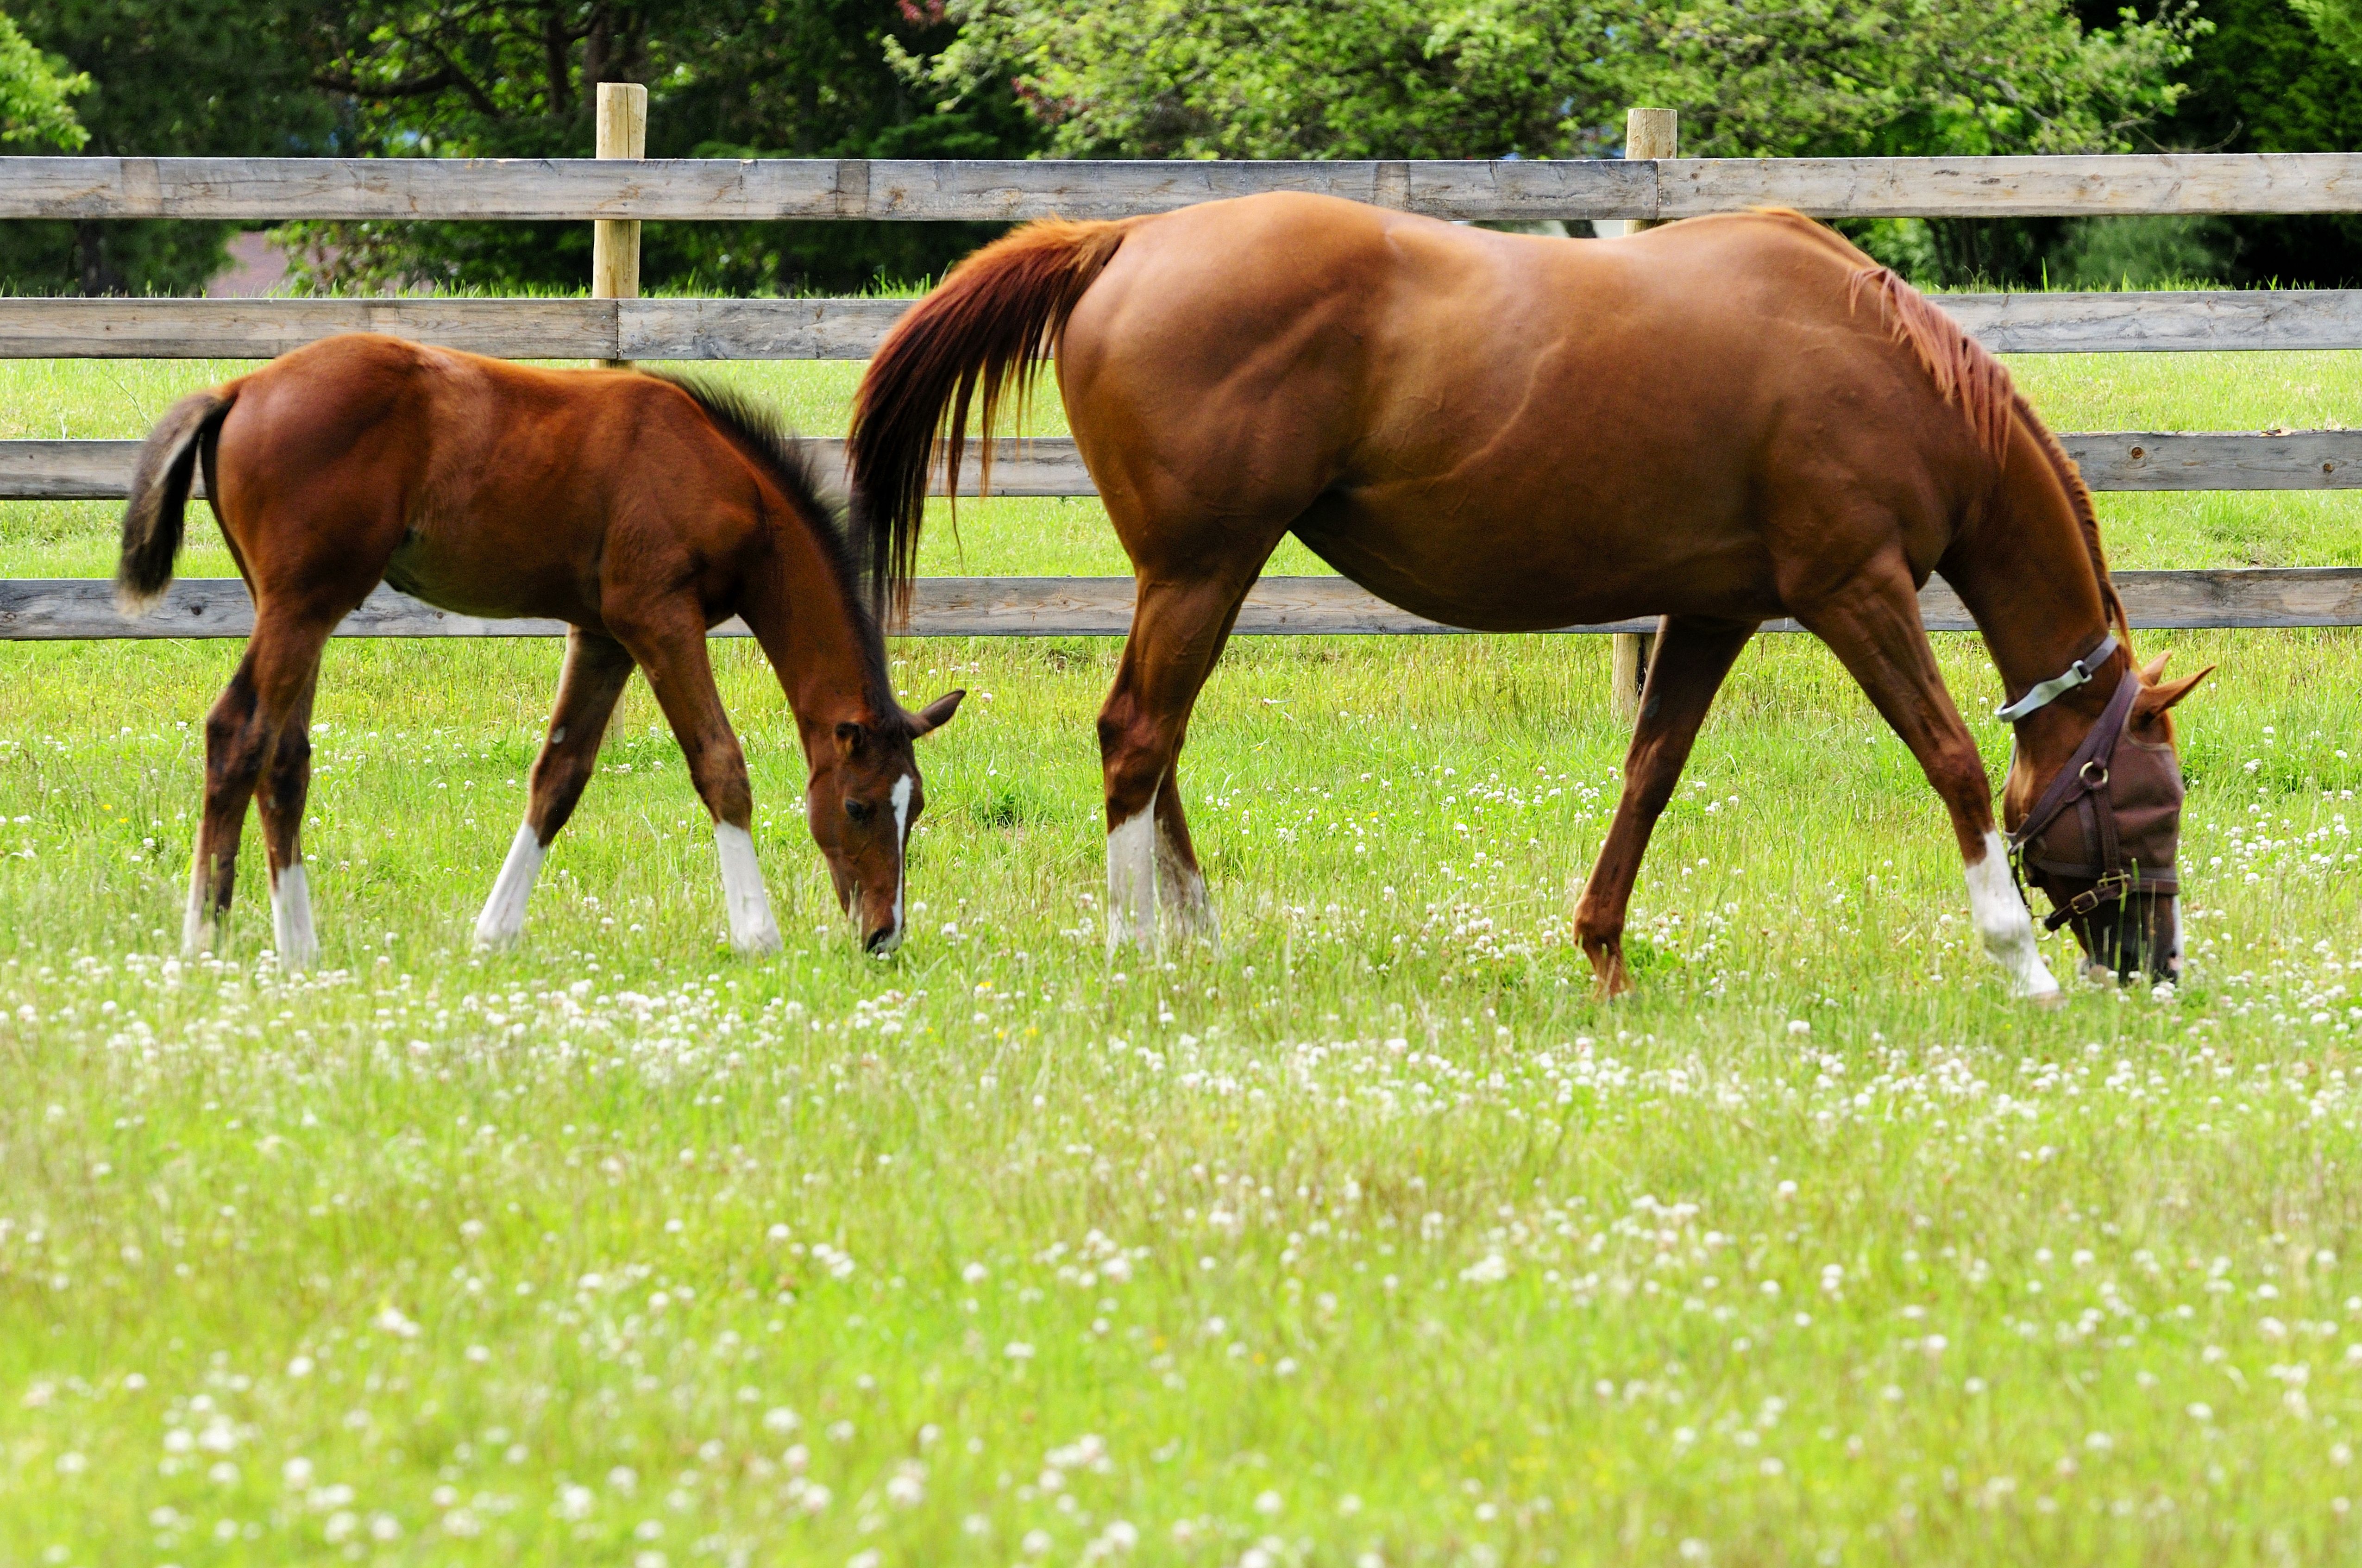 A colt and mare eating grass in a field